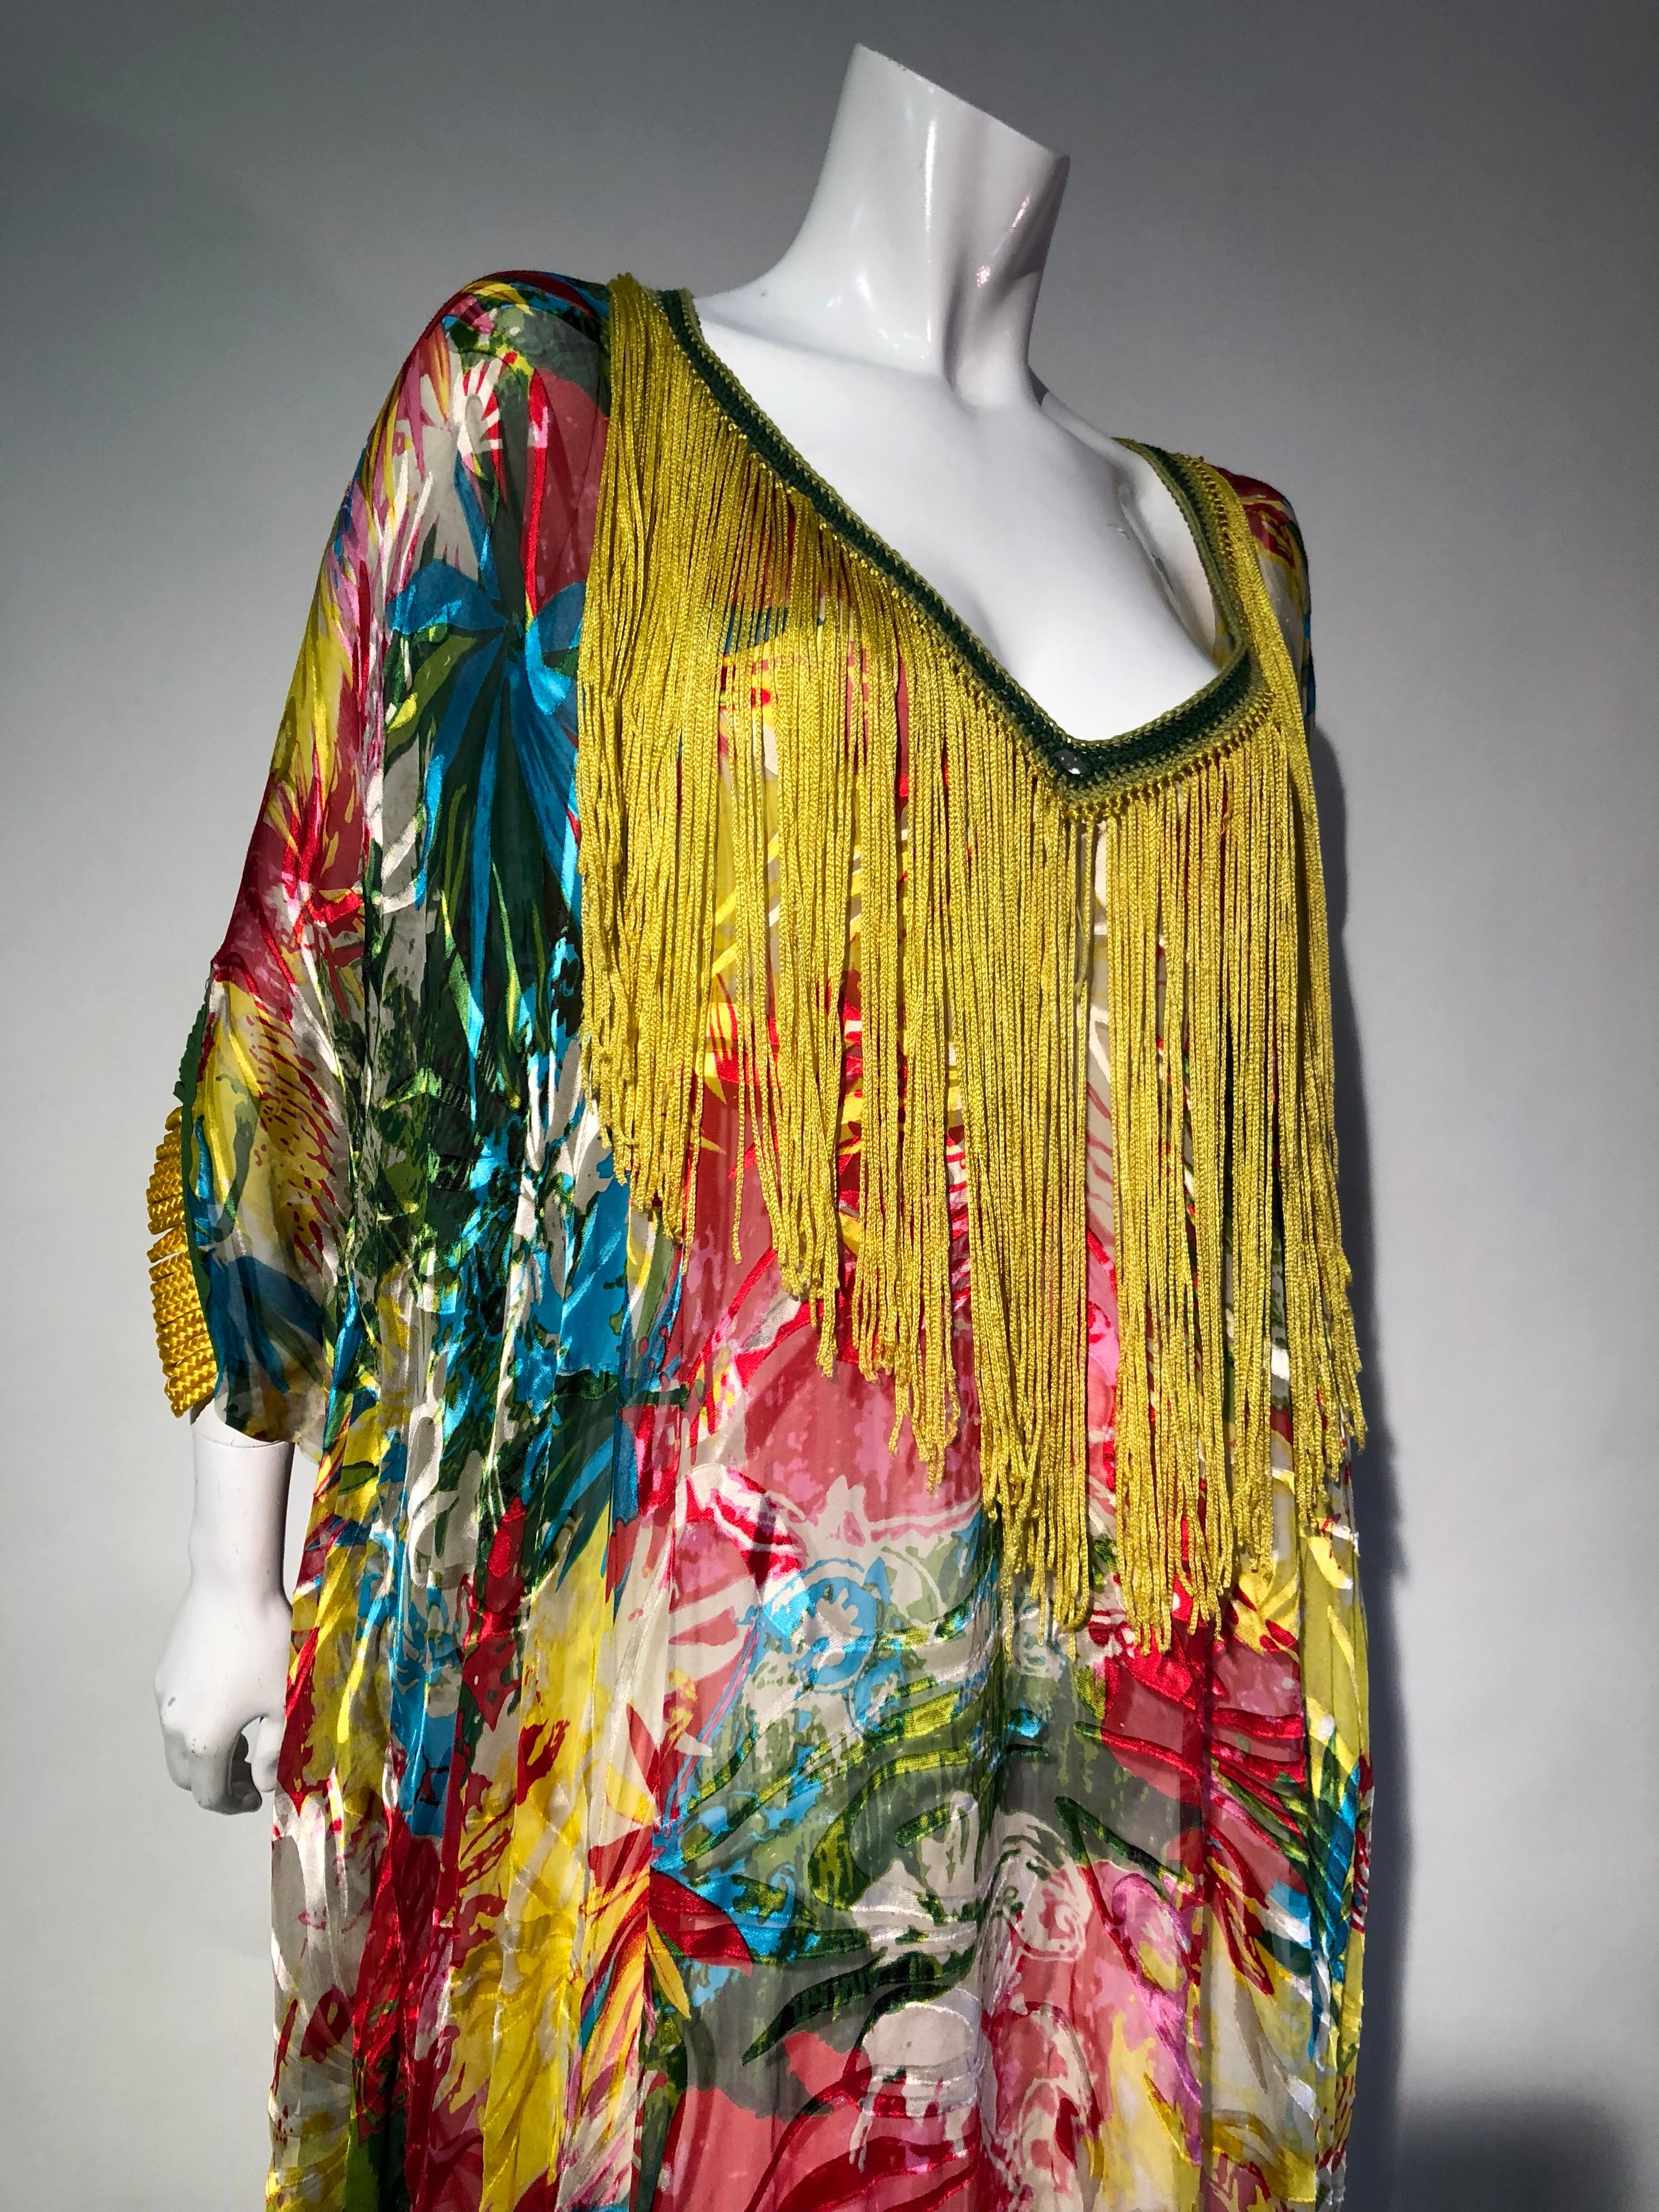 Featured here is a stunning tropical silk print Kaftan in a bright tropical print of yellow, turquoise, red, orange and green exotic florals. This custom made Kaftan is trimmed in coordinating crochet around the entire neckline with long yellow silk